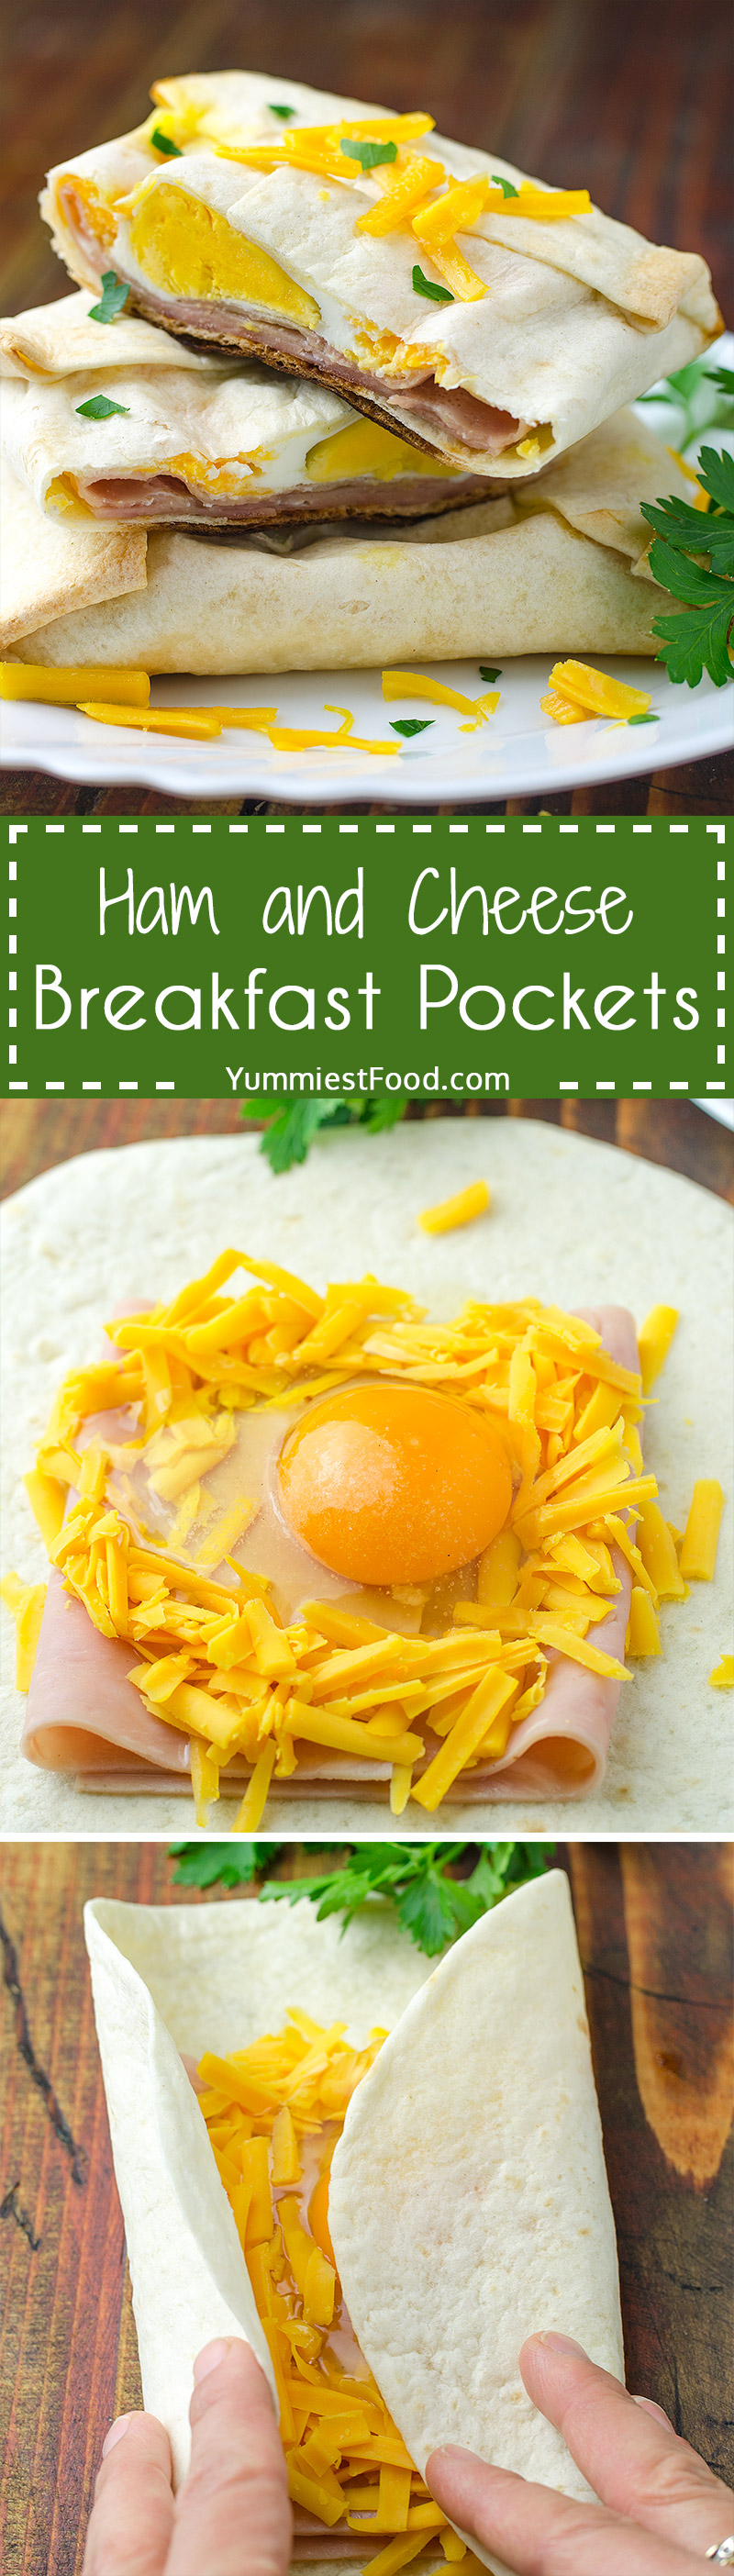 Easy Ham and Cheese Breakfast Pockets - Great simple breakfast recipe